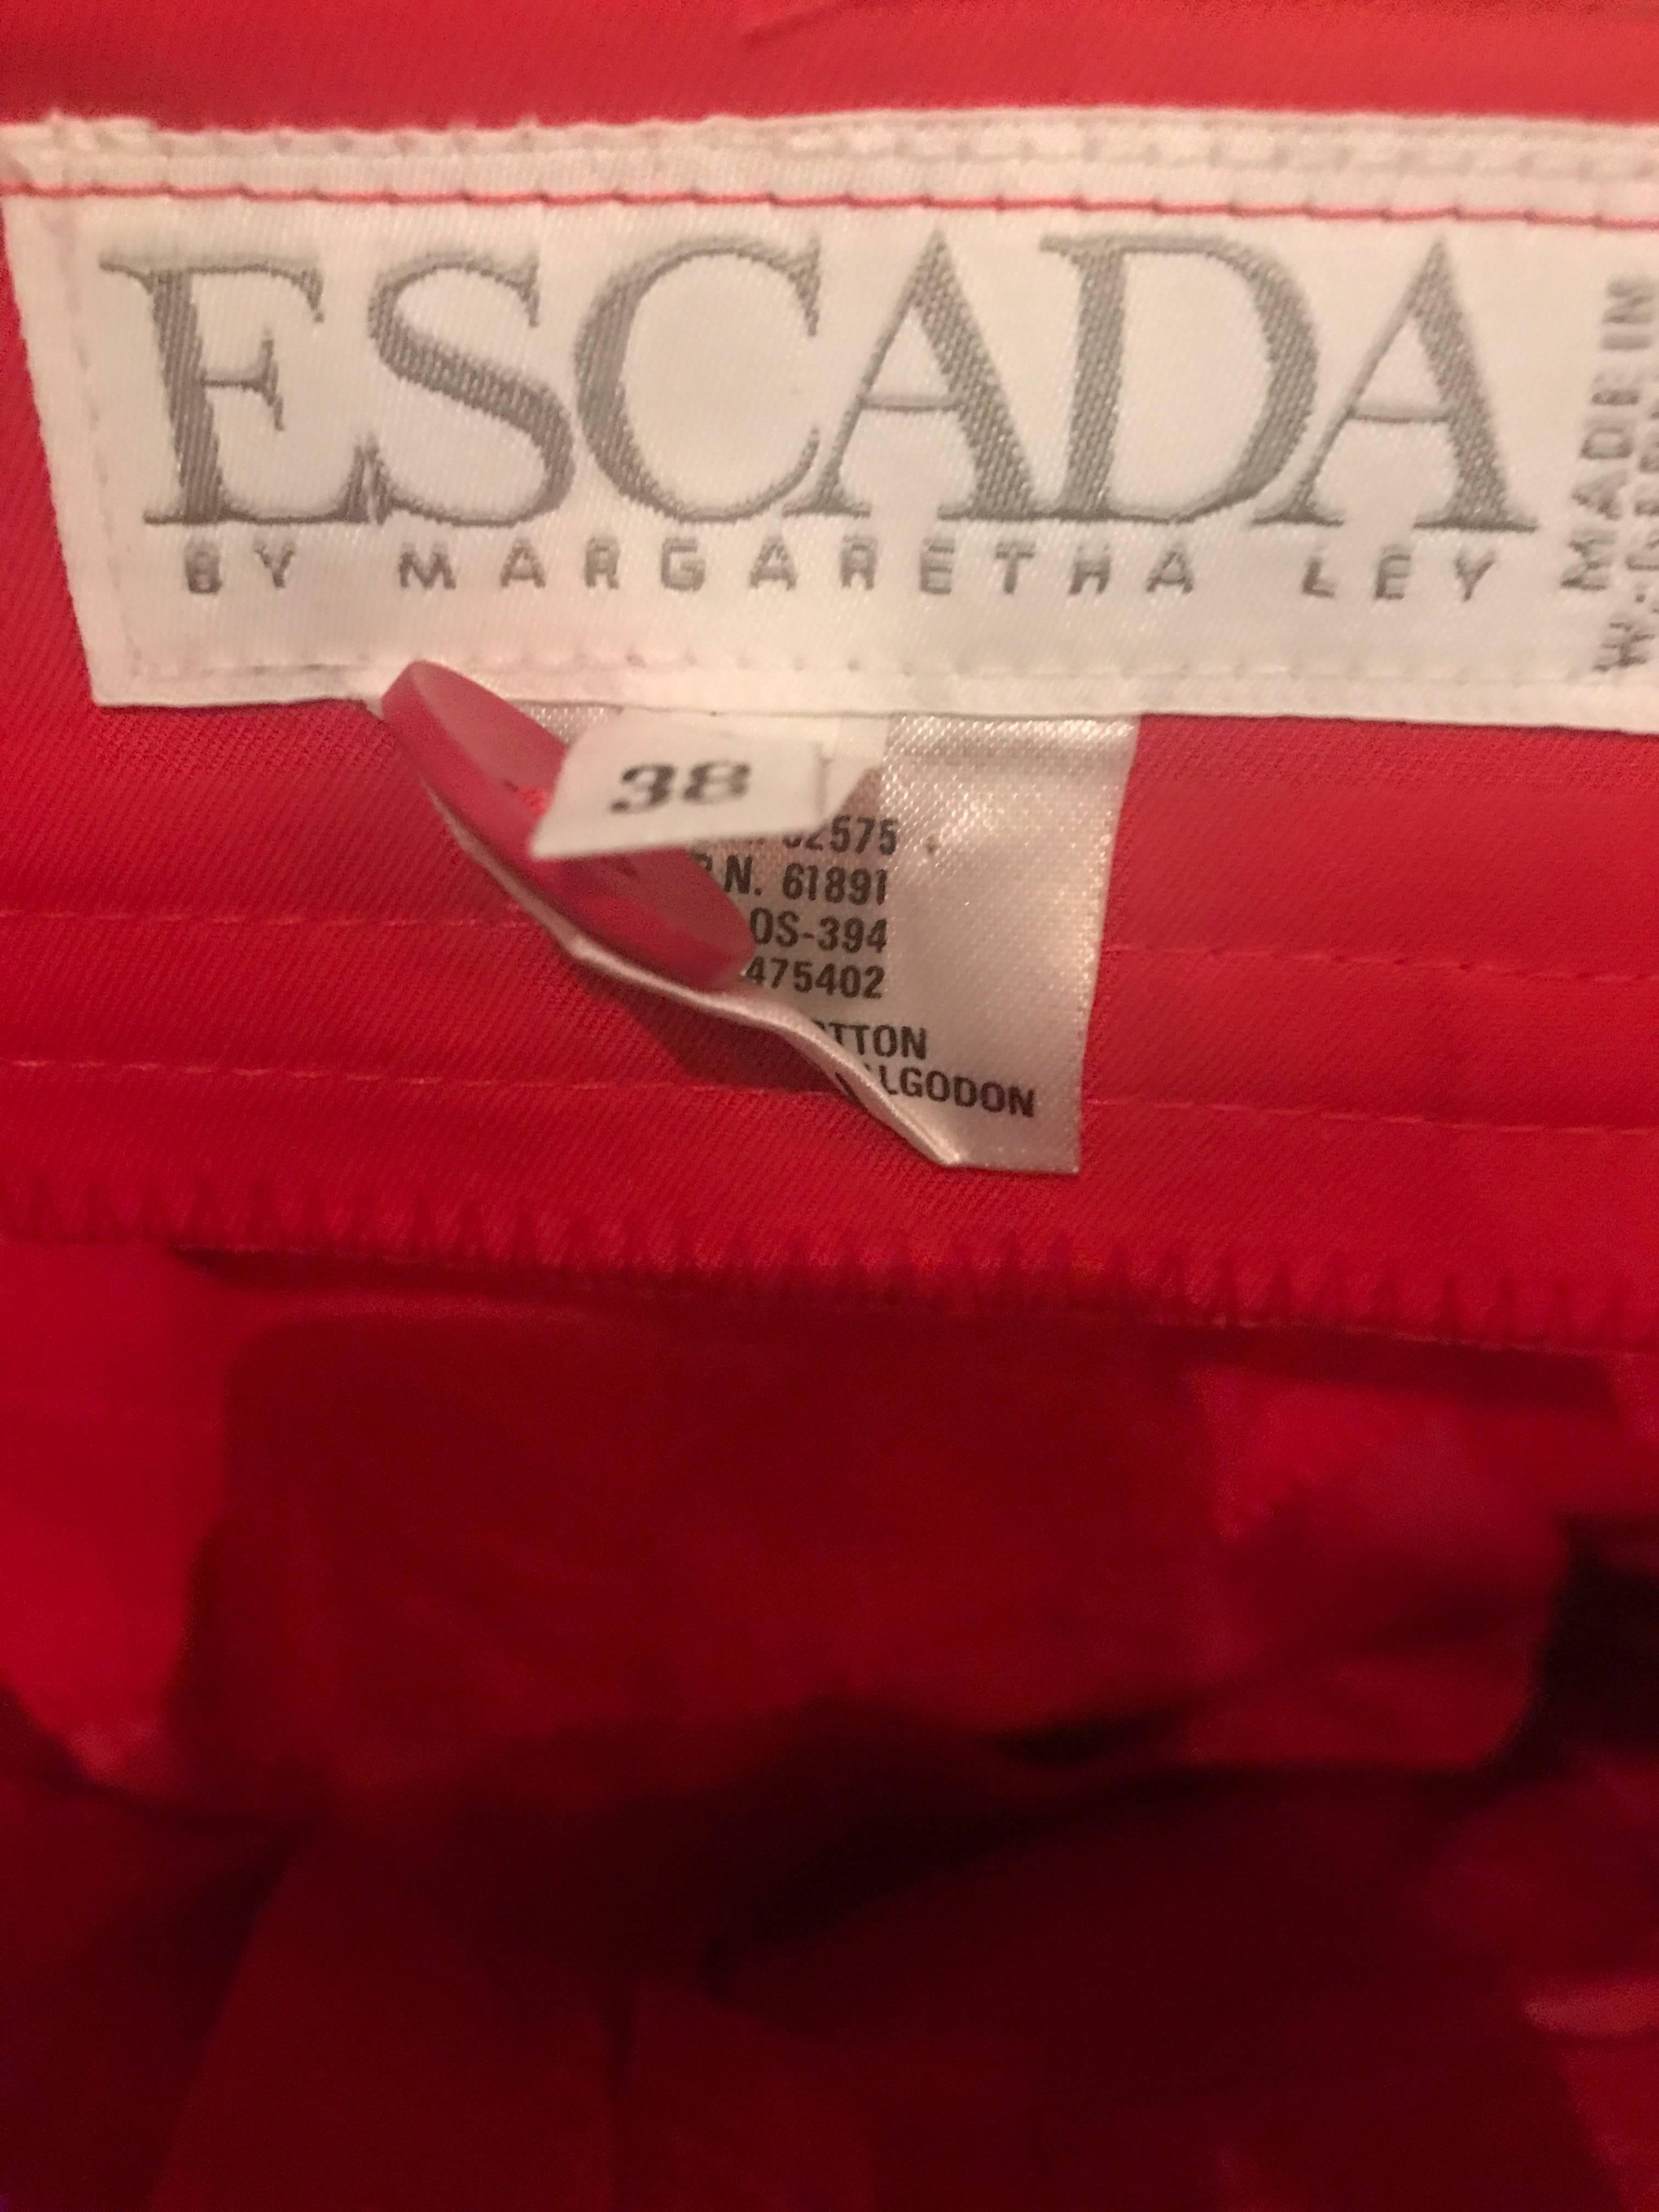 Chic Vintage Escada by Margaretha Ley 1990s Lipstick Red 80s Pleated Shorts 38 For Sale 3